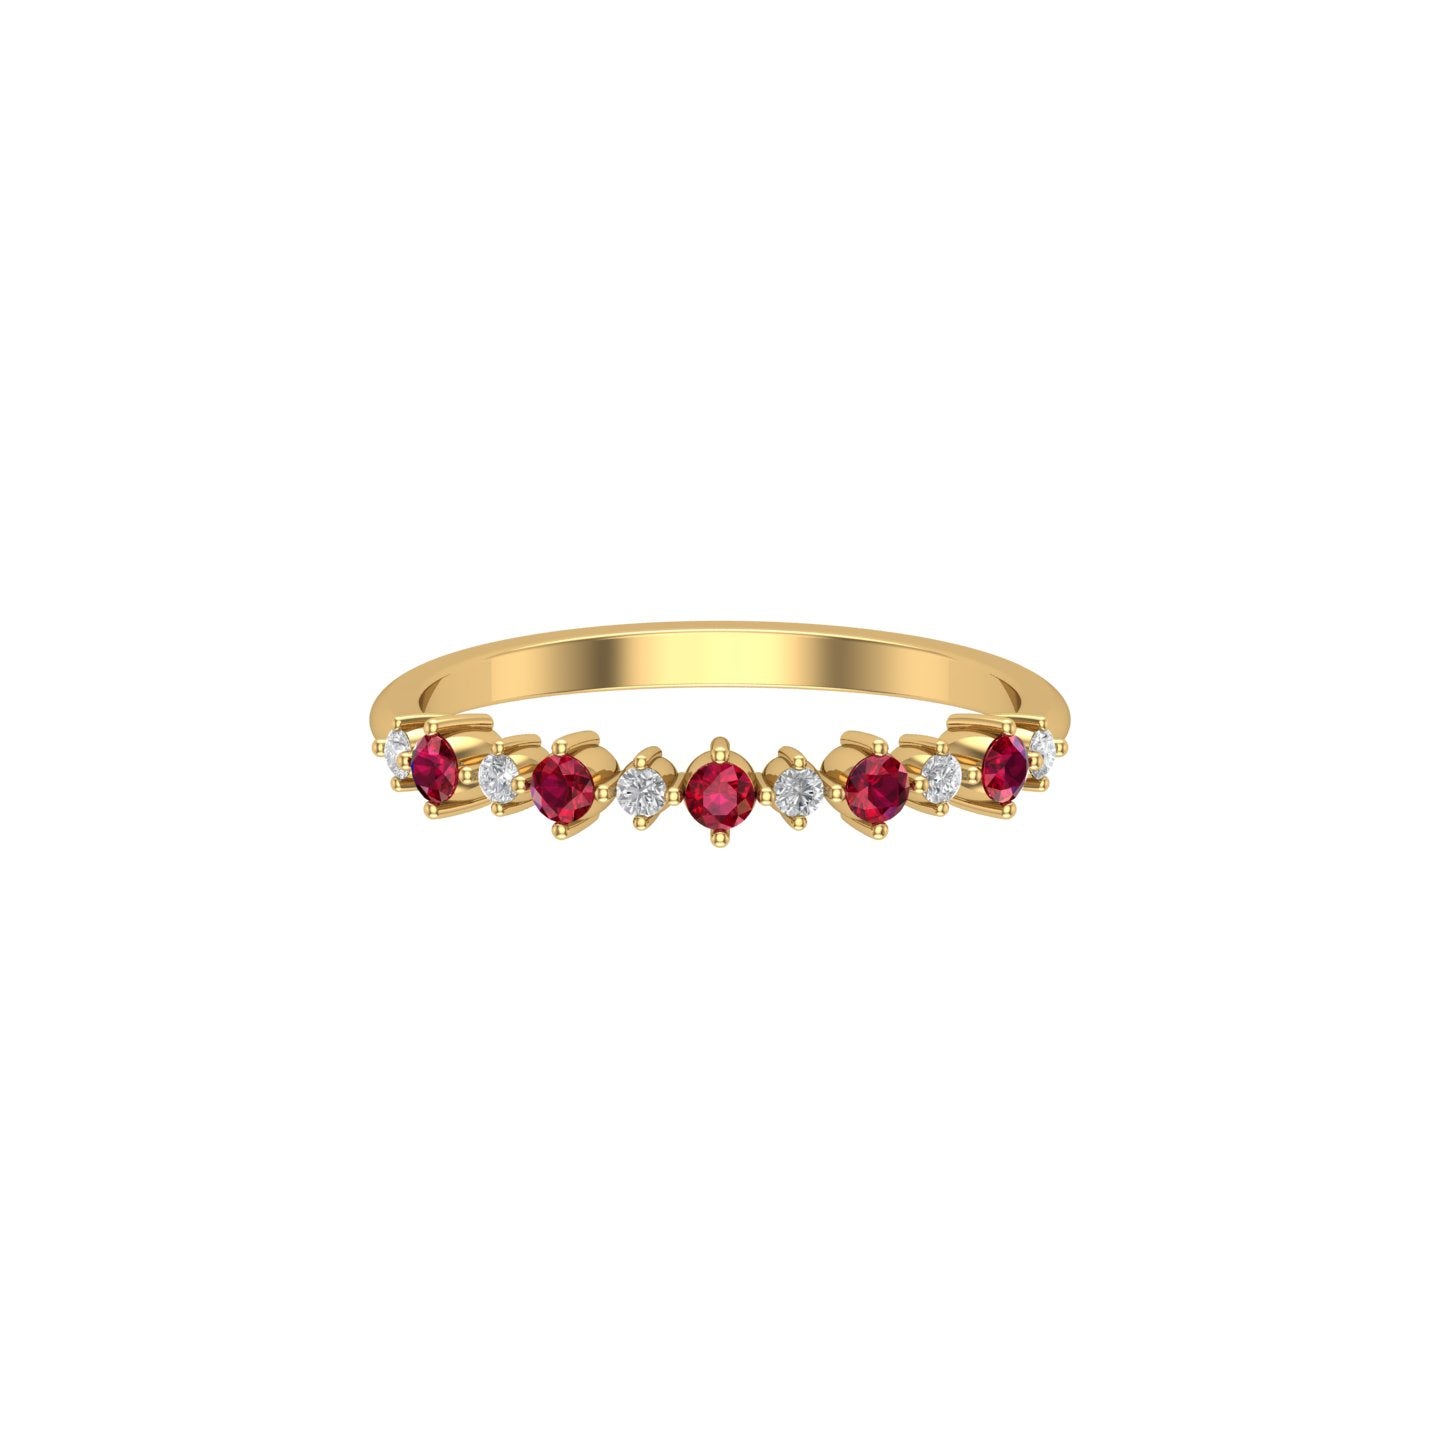 The Diamond Divas of Way-Fil Jewelry - 14K rose gold ruby stackable ring